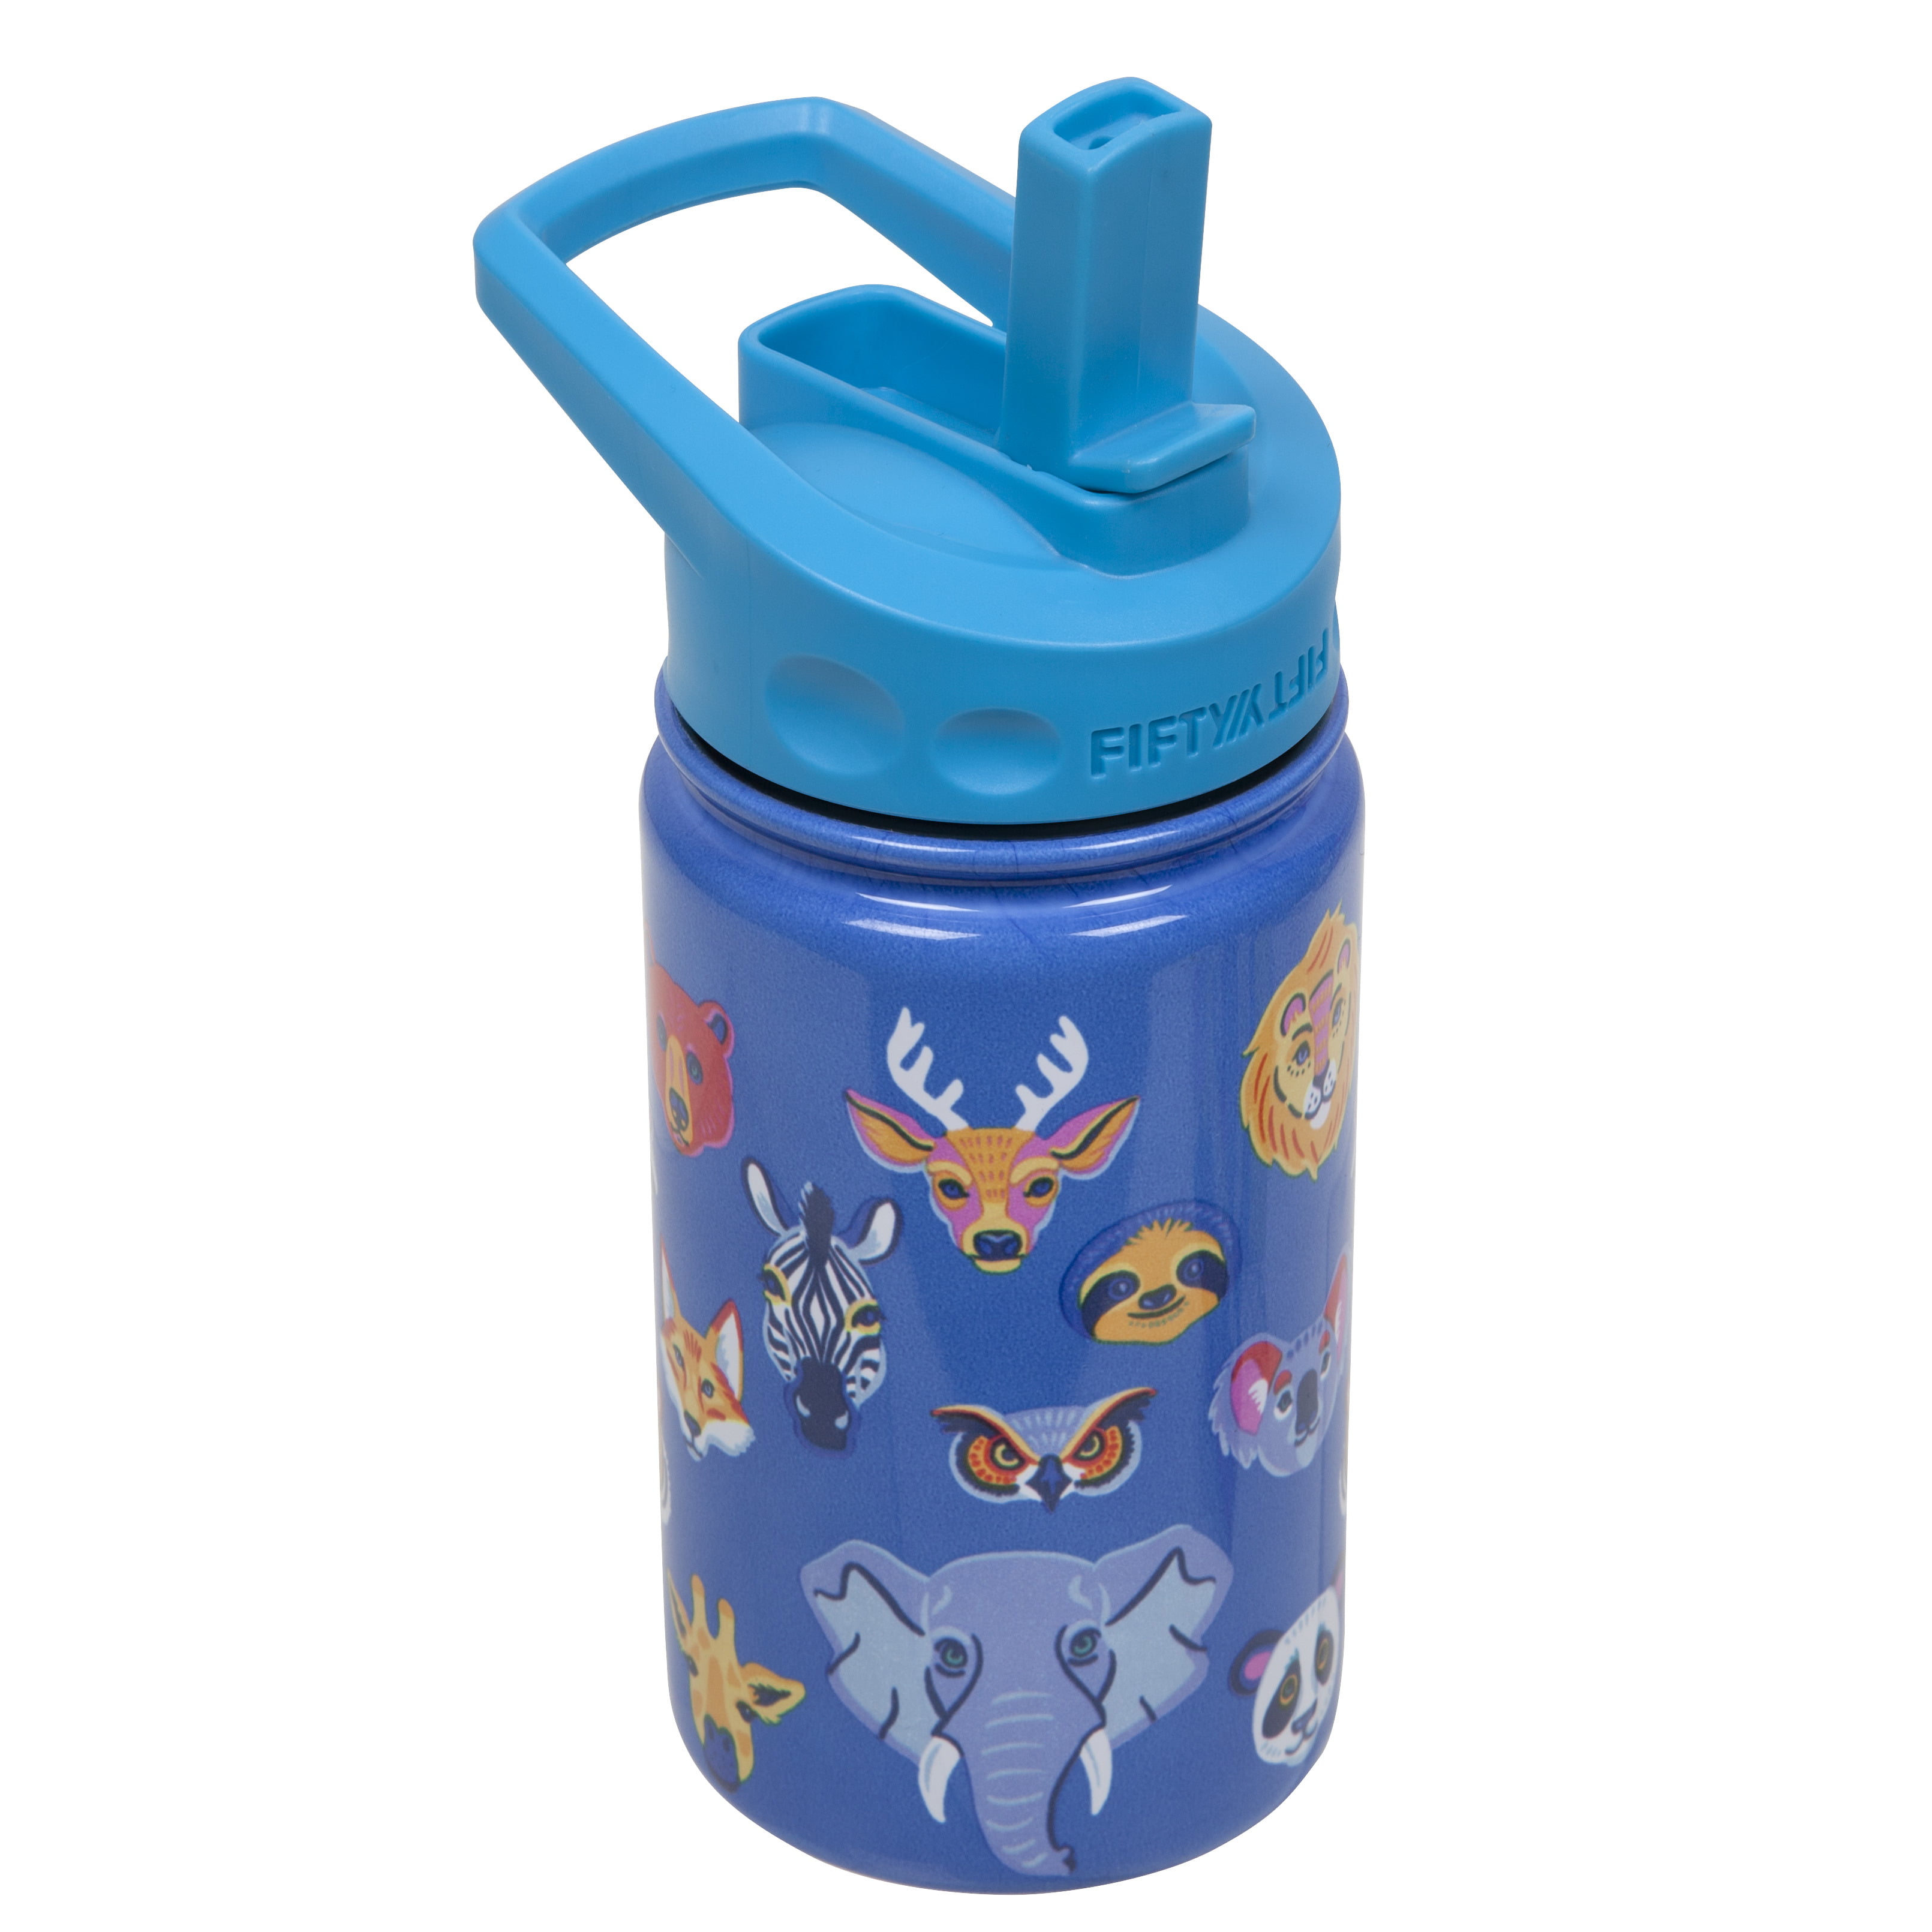 Snug Kids Water Bottle - insulated stainless steel thermos with straw  (Girls/Boys) - Dinosaurs, 12oz